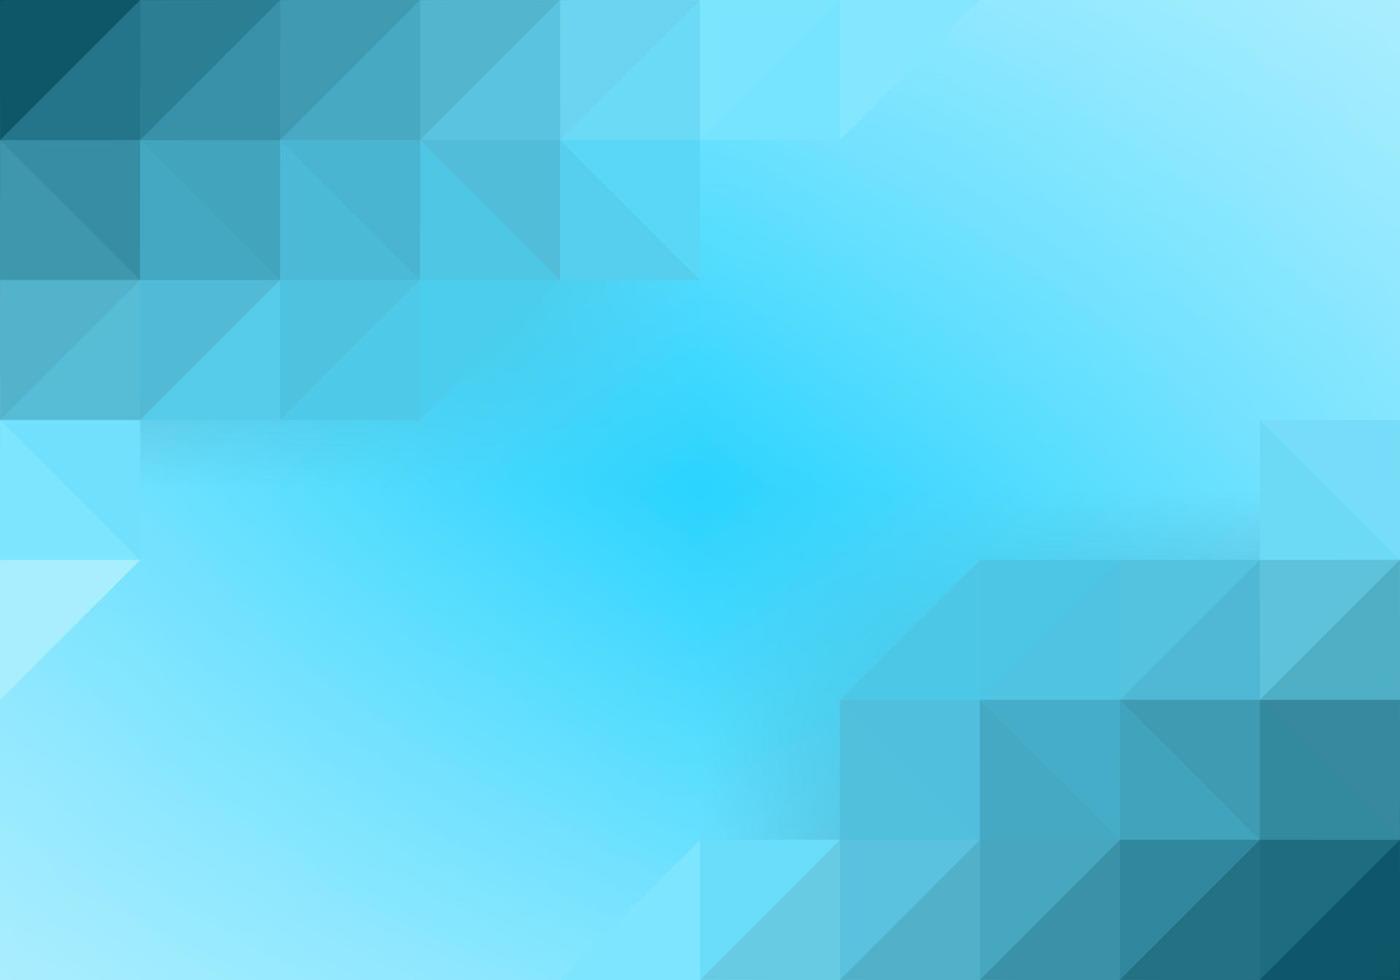 mesh background template is blue. suitable for wallpaper, presentation background, etc. vector